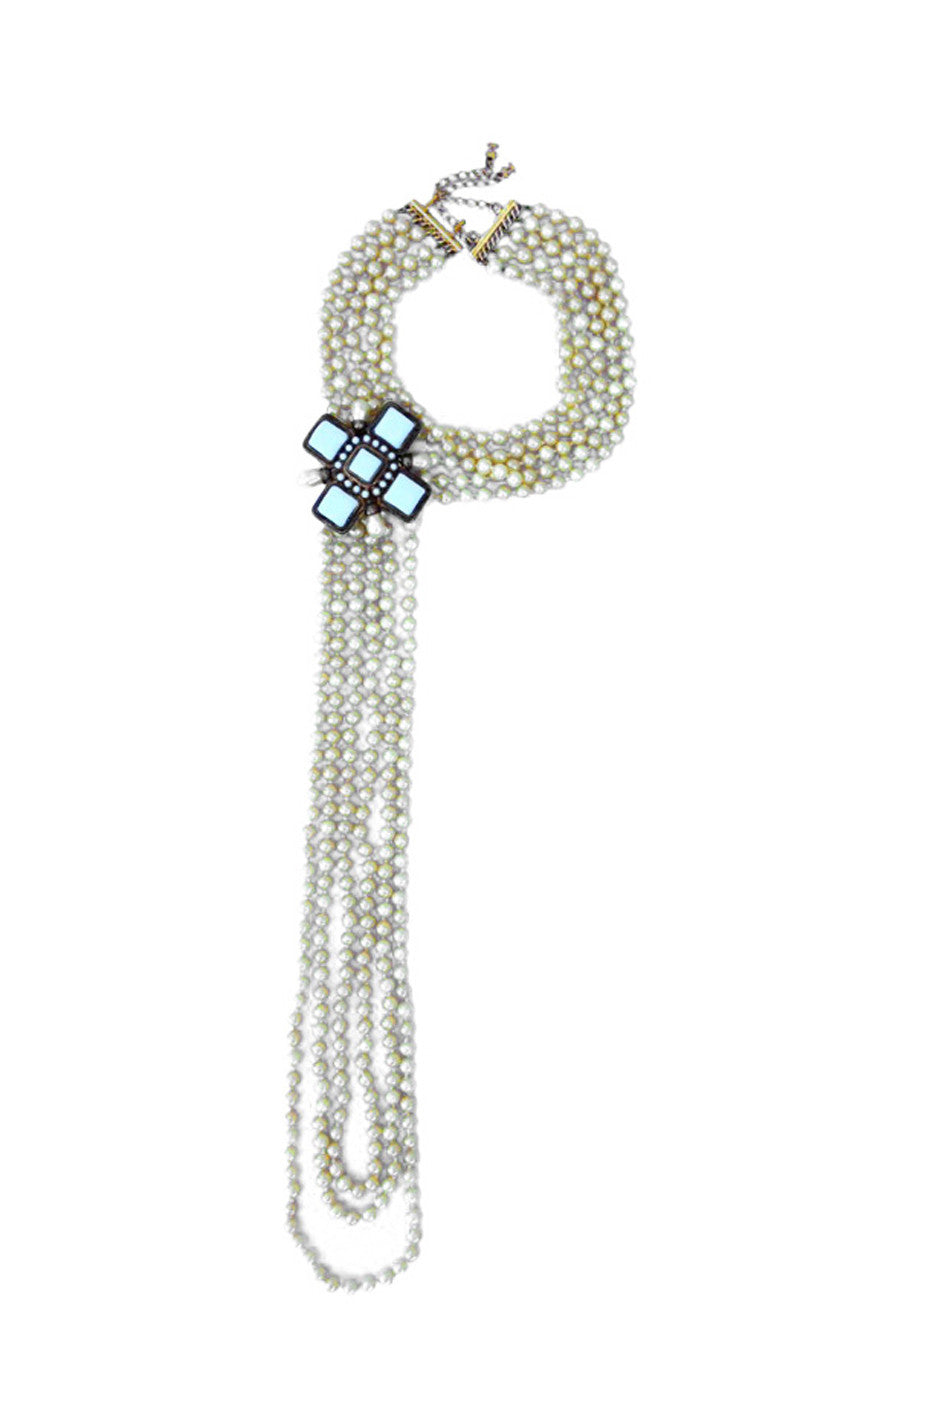 Chanel 01A 2001 Byzantine Cross Gripoix Poured Glass Coloured Stone Necklace  with Faux Pearls